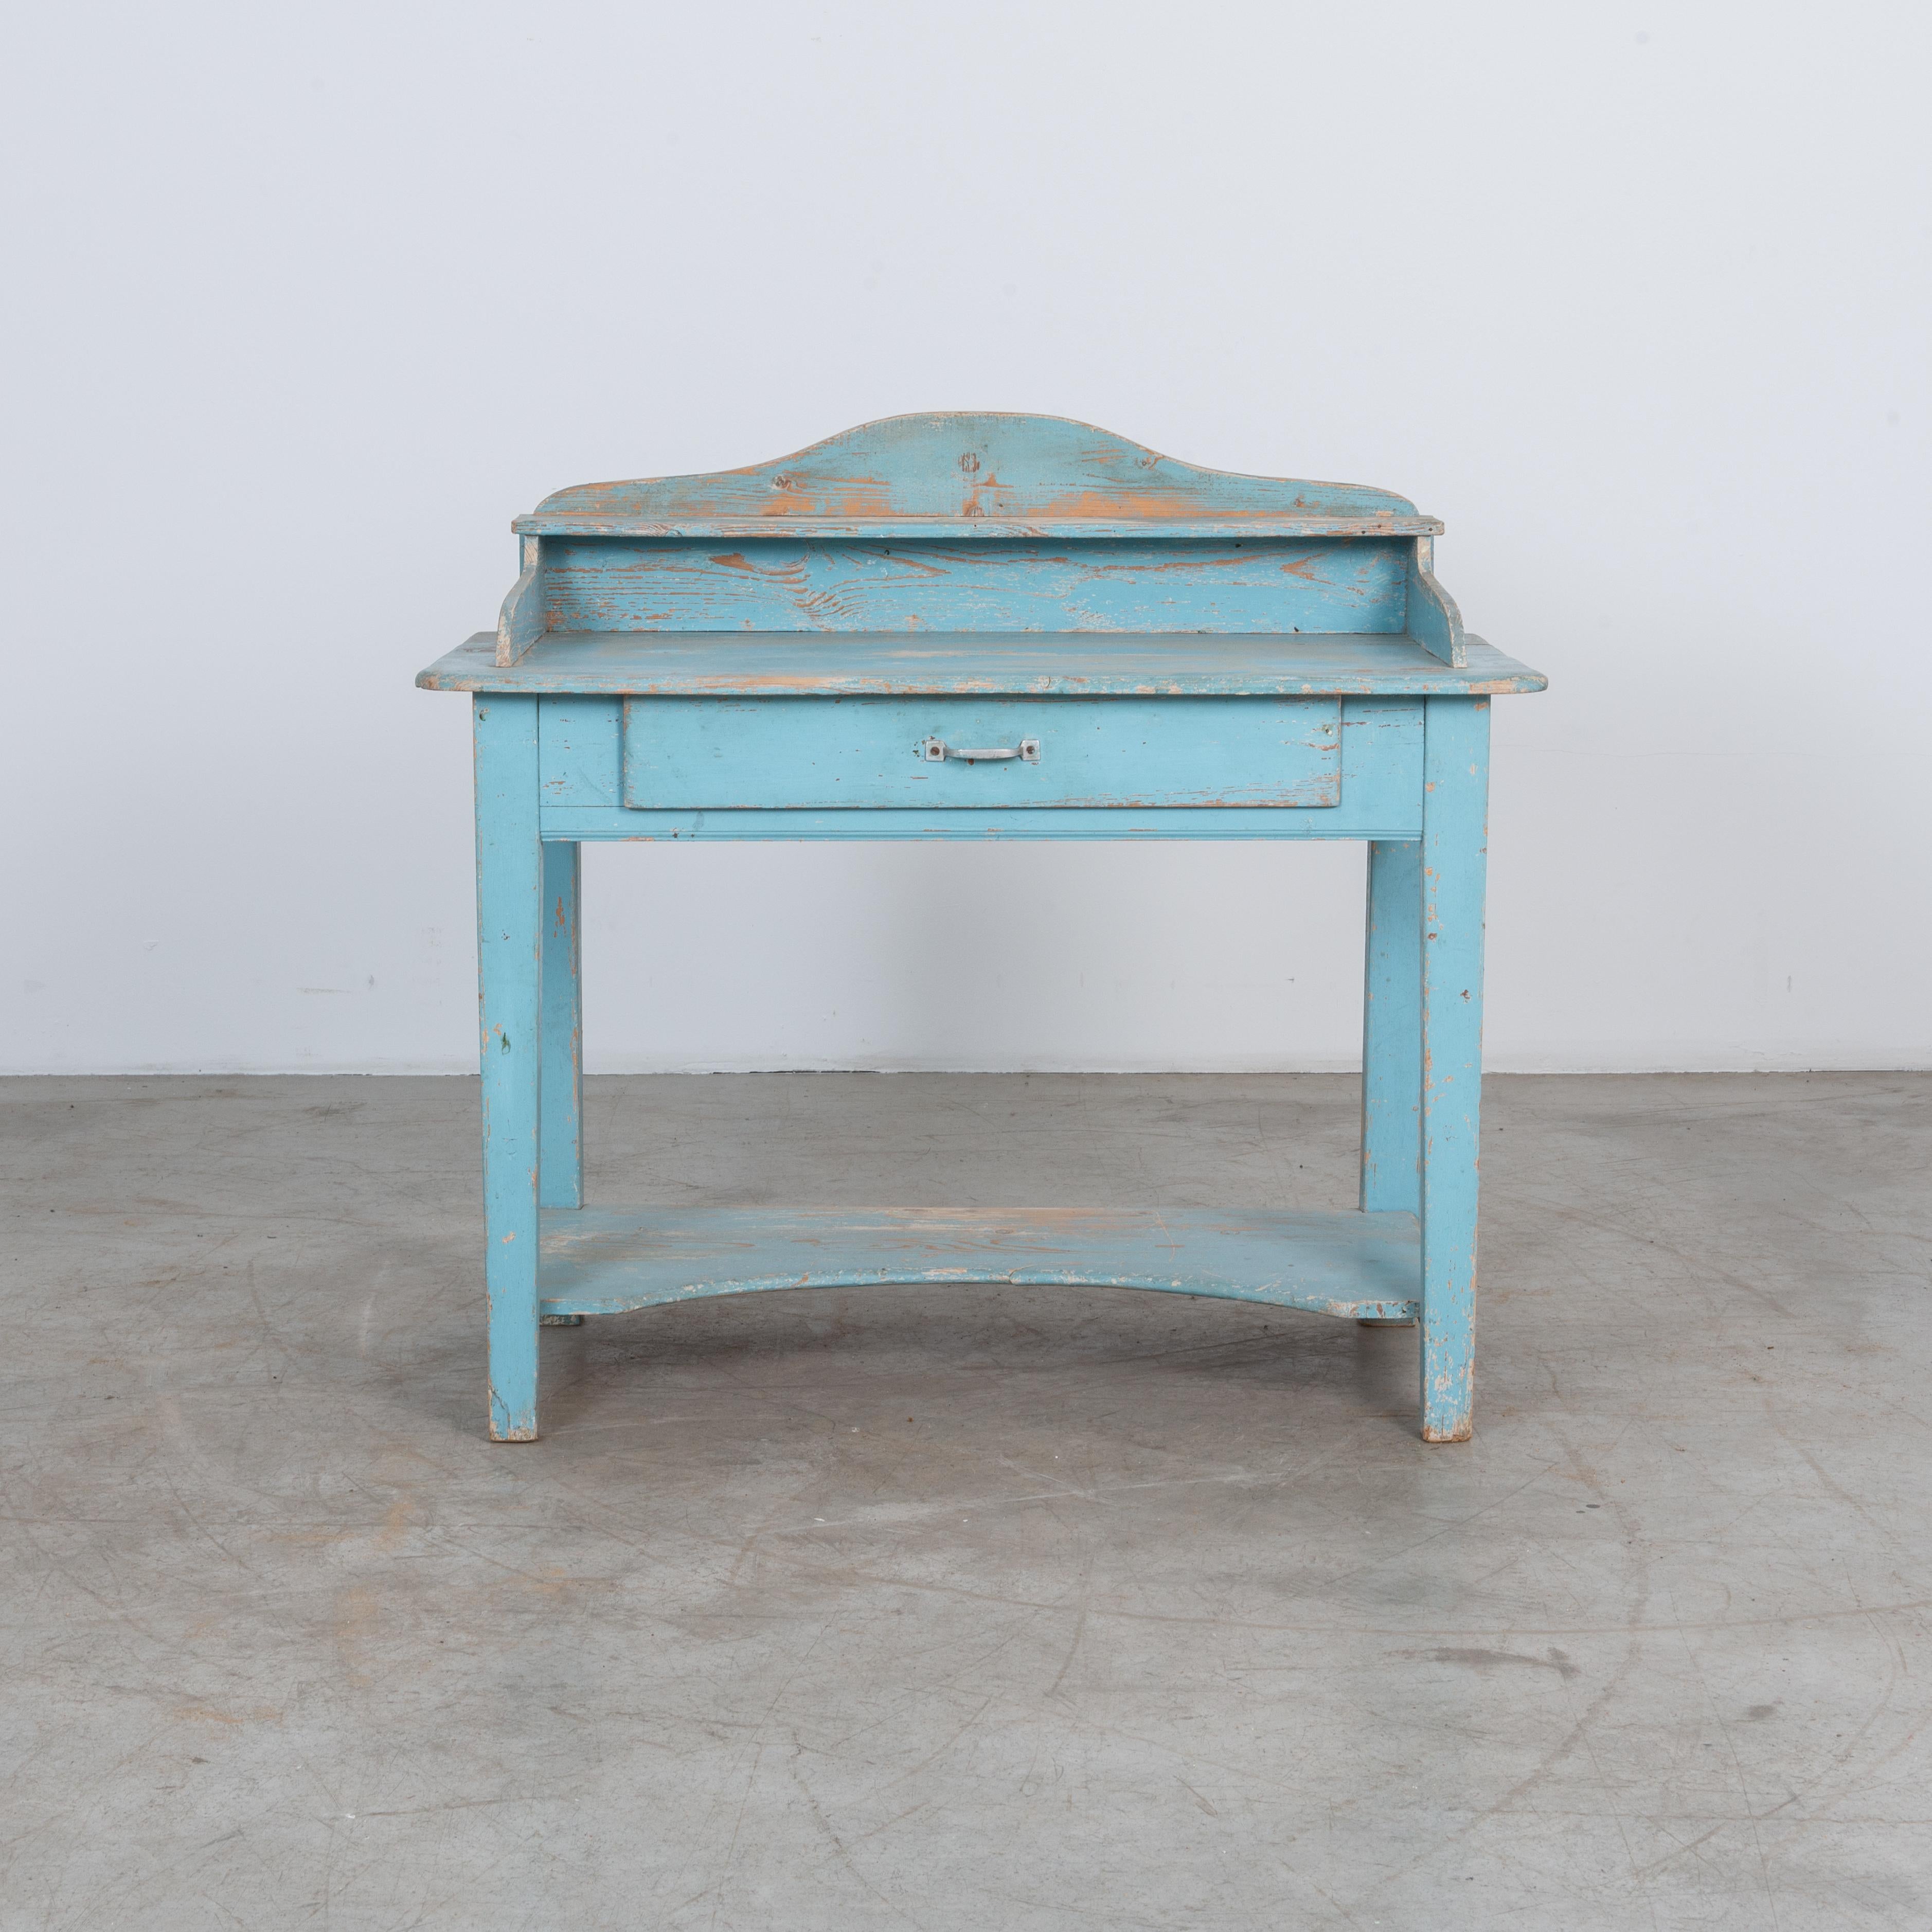 A colorful blue farm table from France, circa 1900. Used as a casual desk or a place to get ready, this charming table features an indented lower shelf, spacious drawer and practical wooden surround. An organizational asset with a splash of color,